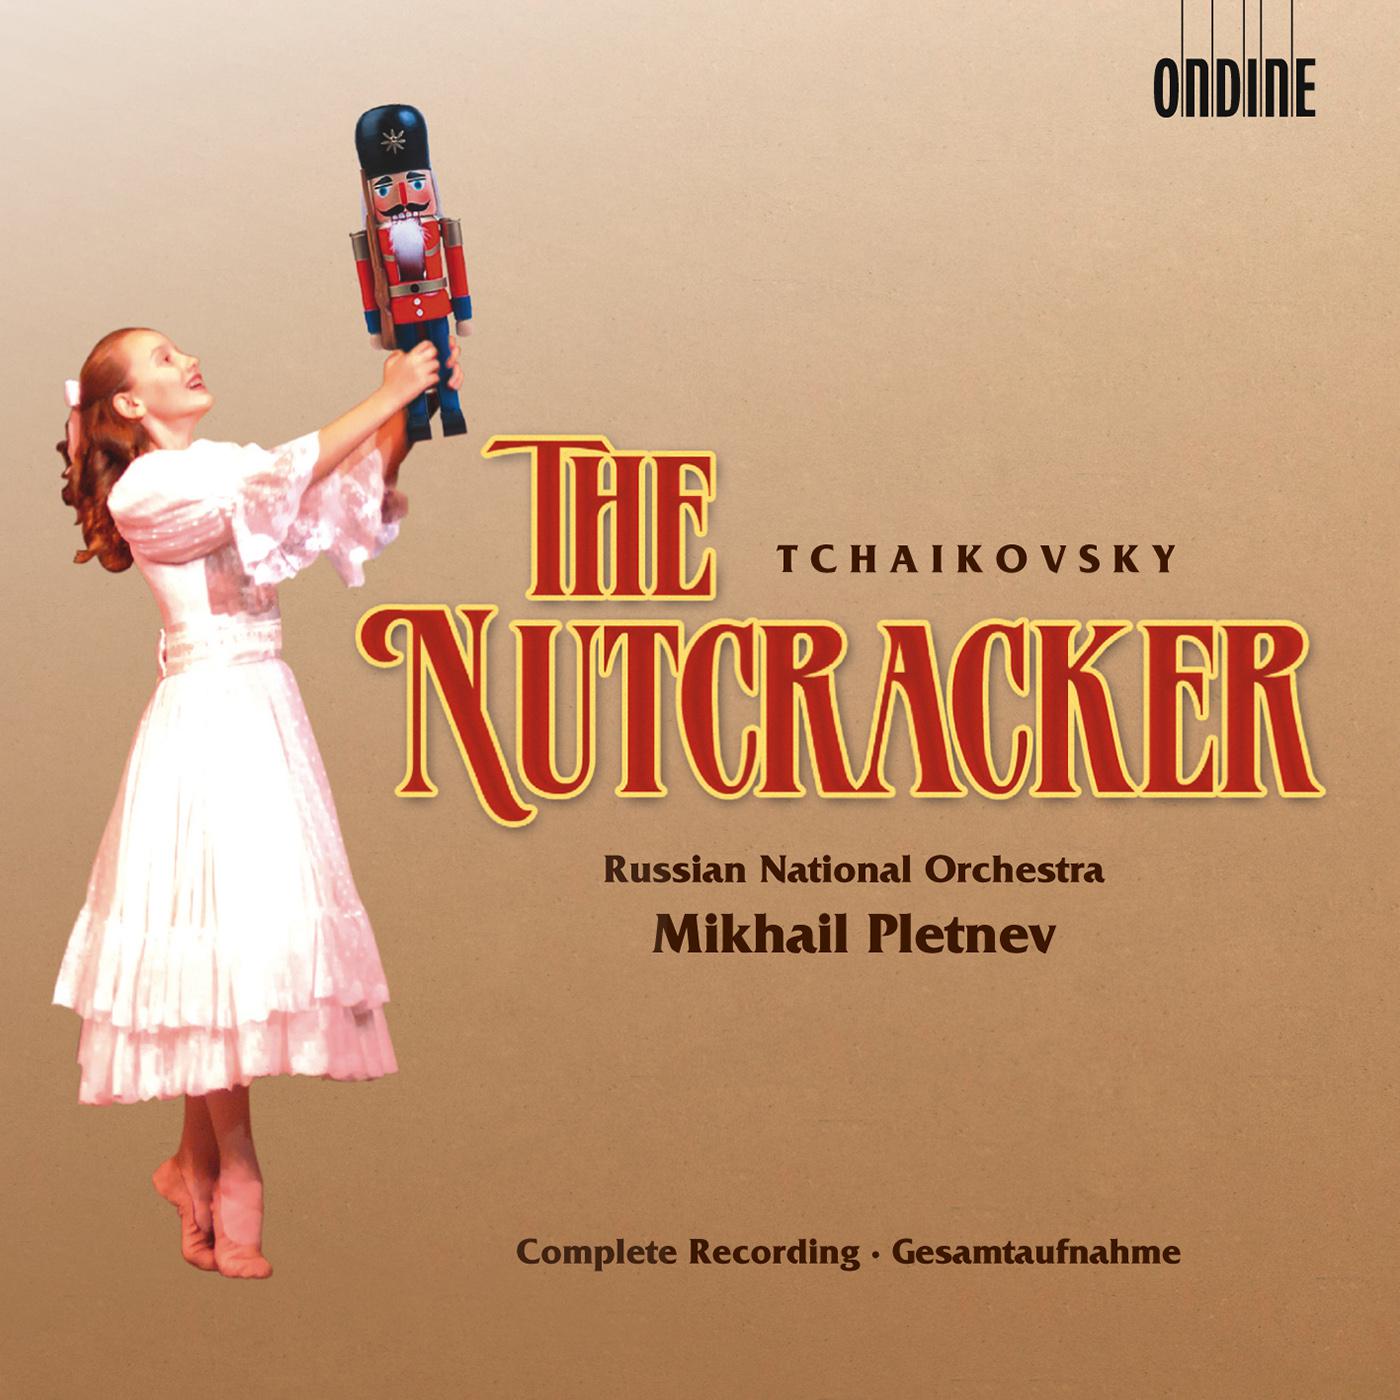 The Nutcracker, Op. 71: Act I Tableau 2: Waltz of the Snowflakes